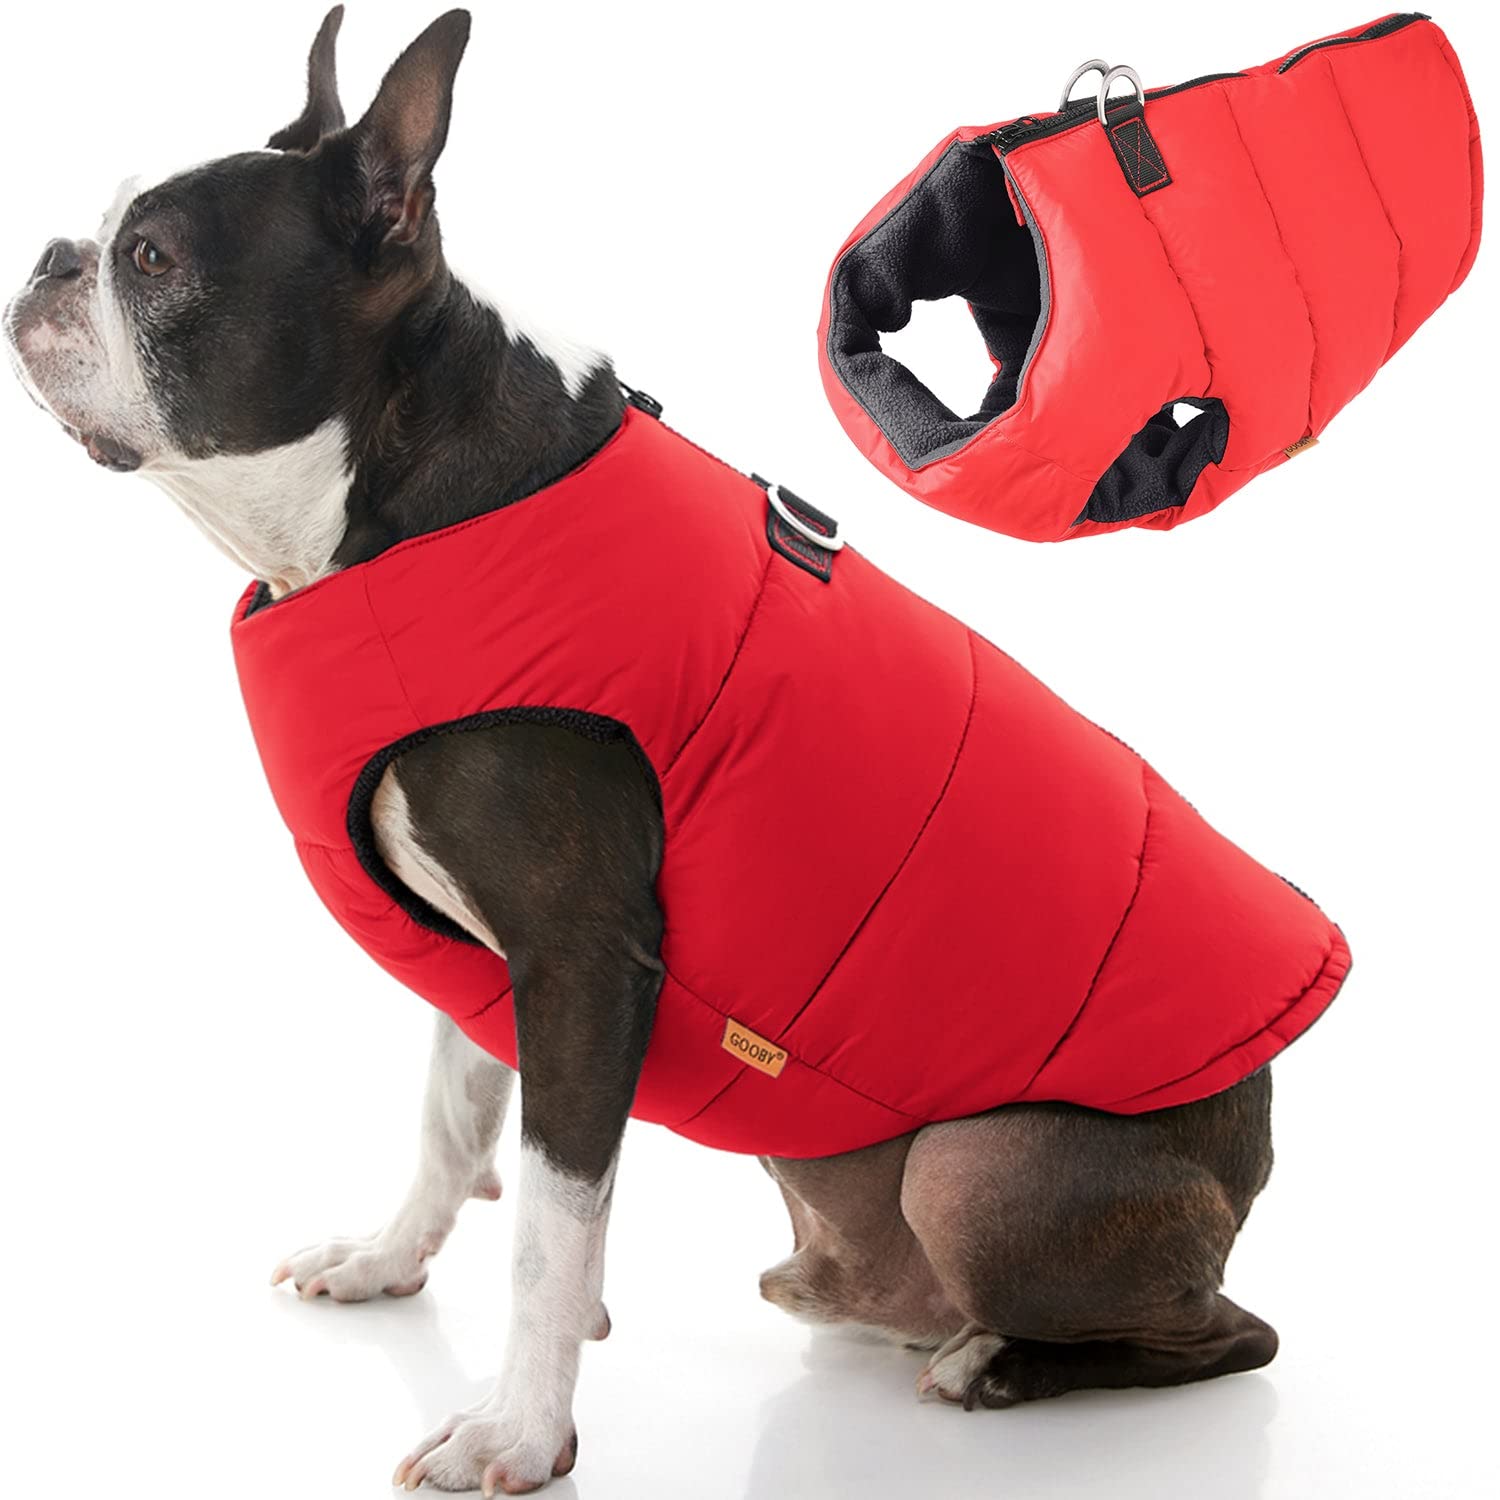 gooby Padded Vest Dog Jacket - Solid Red X-Large - Warm Zip Up Dog Vest Fleece Jacket with Dual D Ring Leash - Water Resistant S